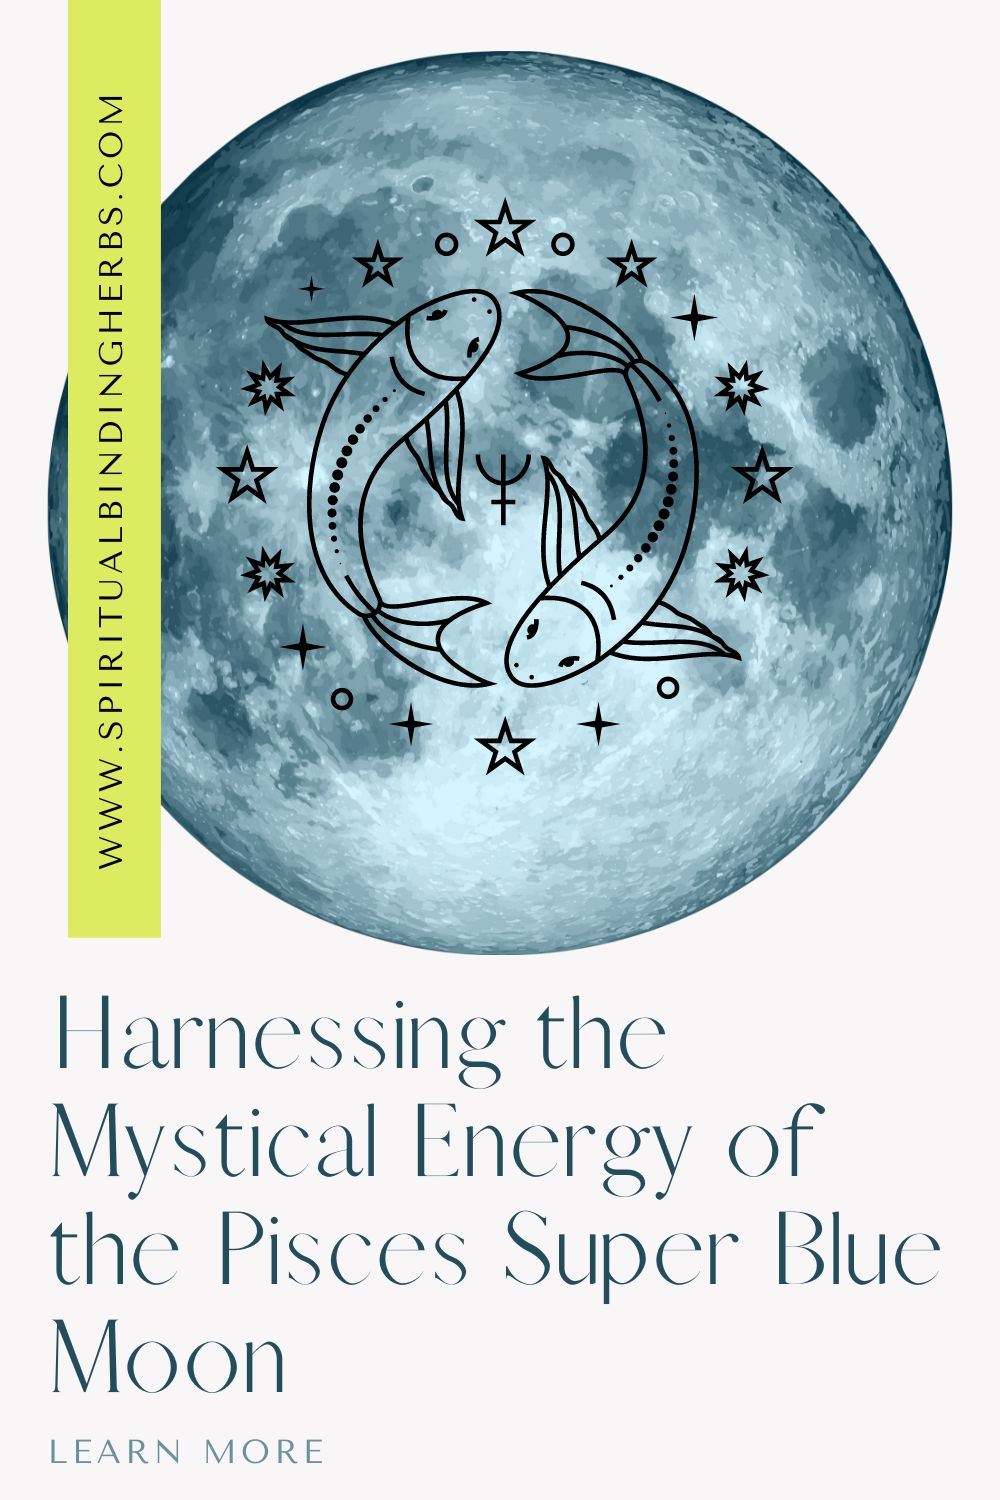 Harnessing The Mystical Energy Of The Pisces Super Blue Moon